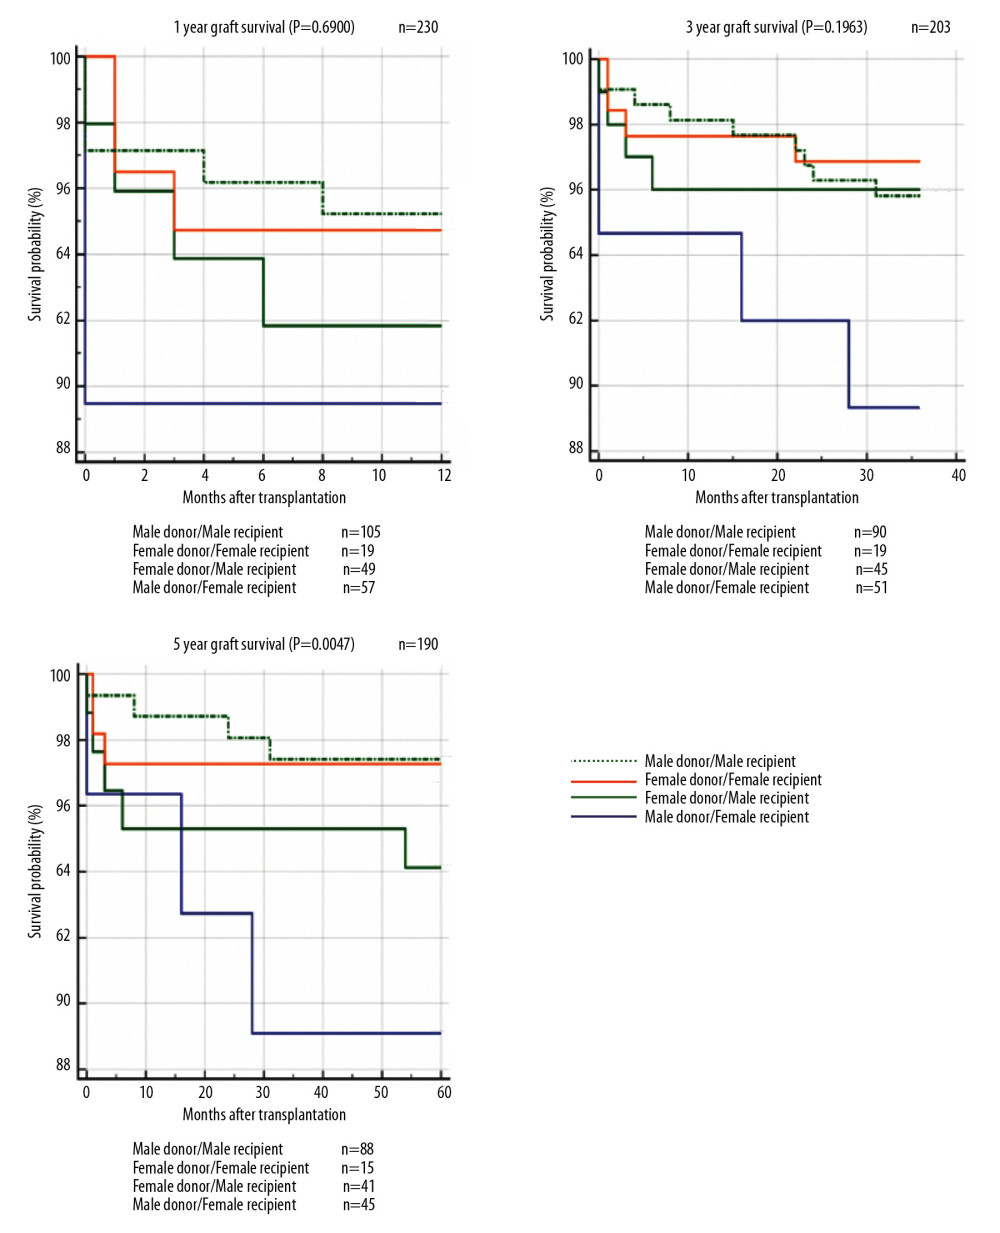 The 1-year, 3-year, and 5-year graft survival after kidney transplantation.